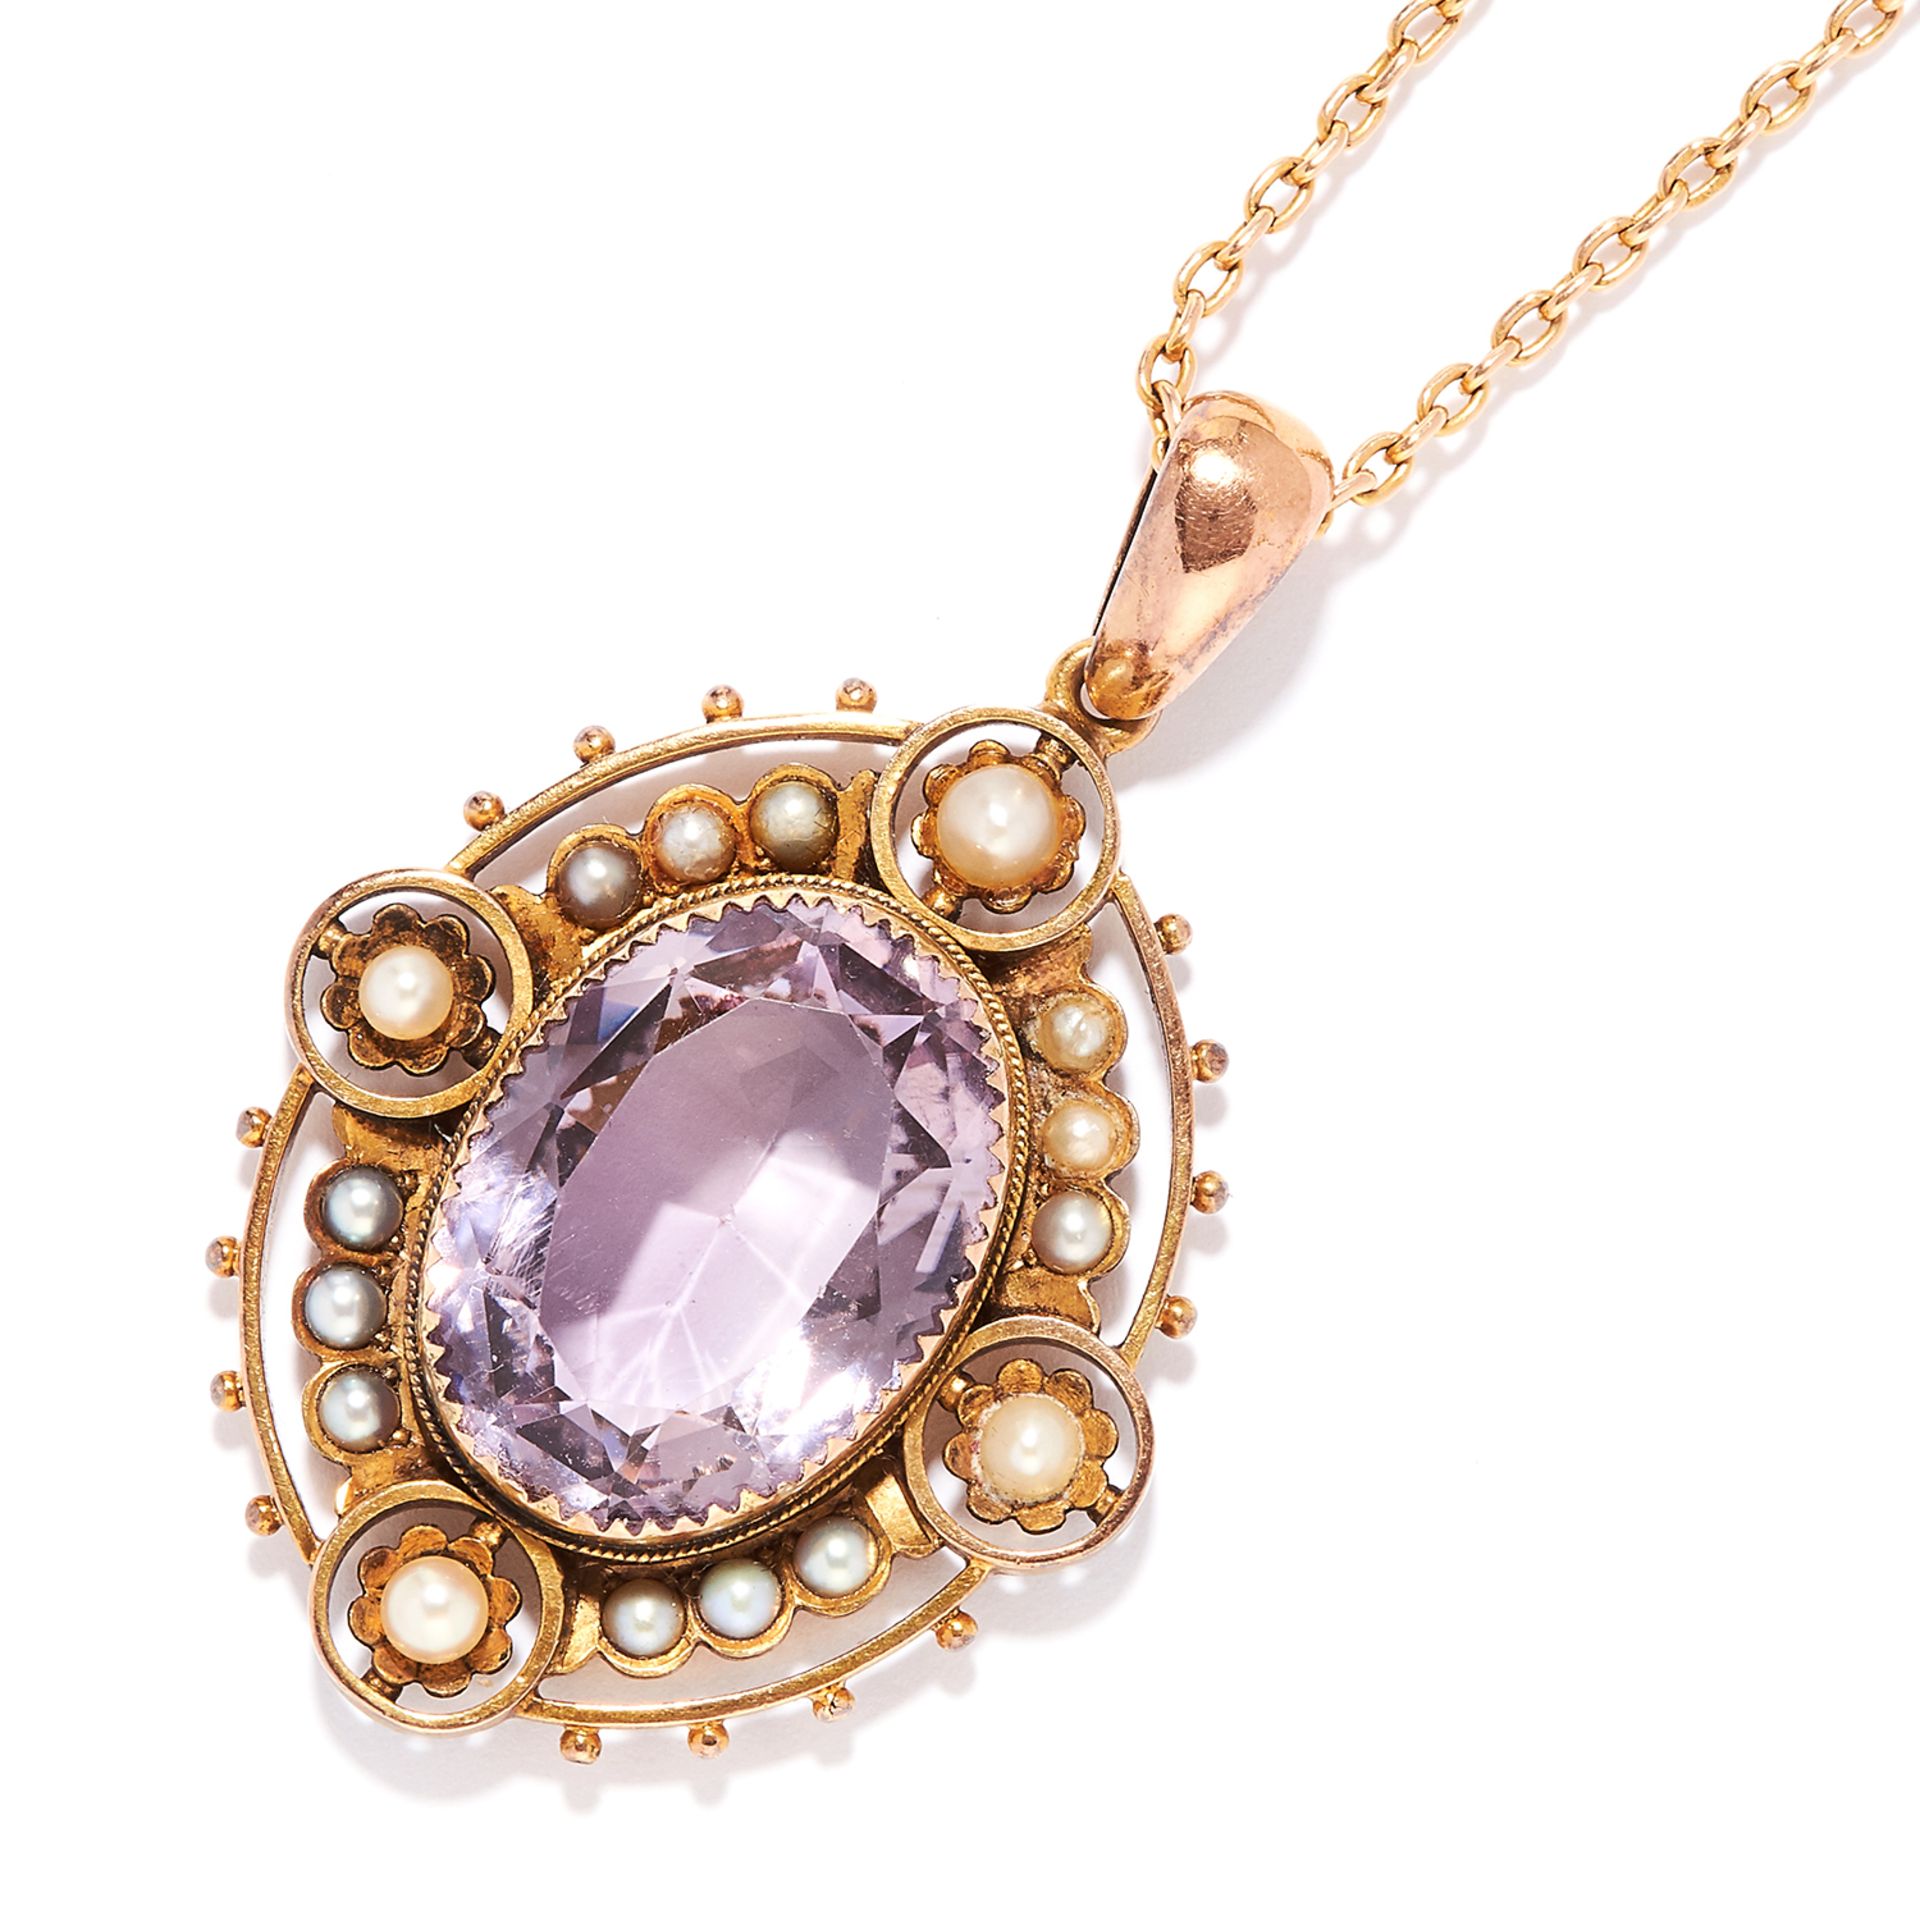 ANTIQUE AMETHYST AND PEARL PENDANT AND CHAIN in 15ct yellow gold, oval cut amethyst within a